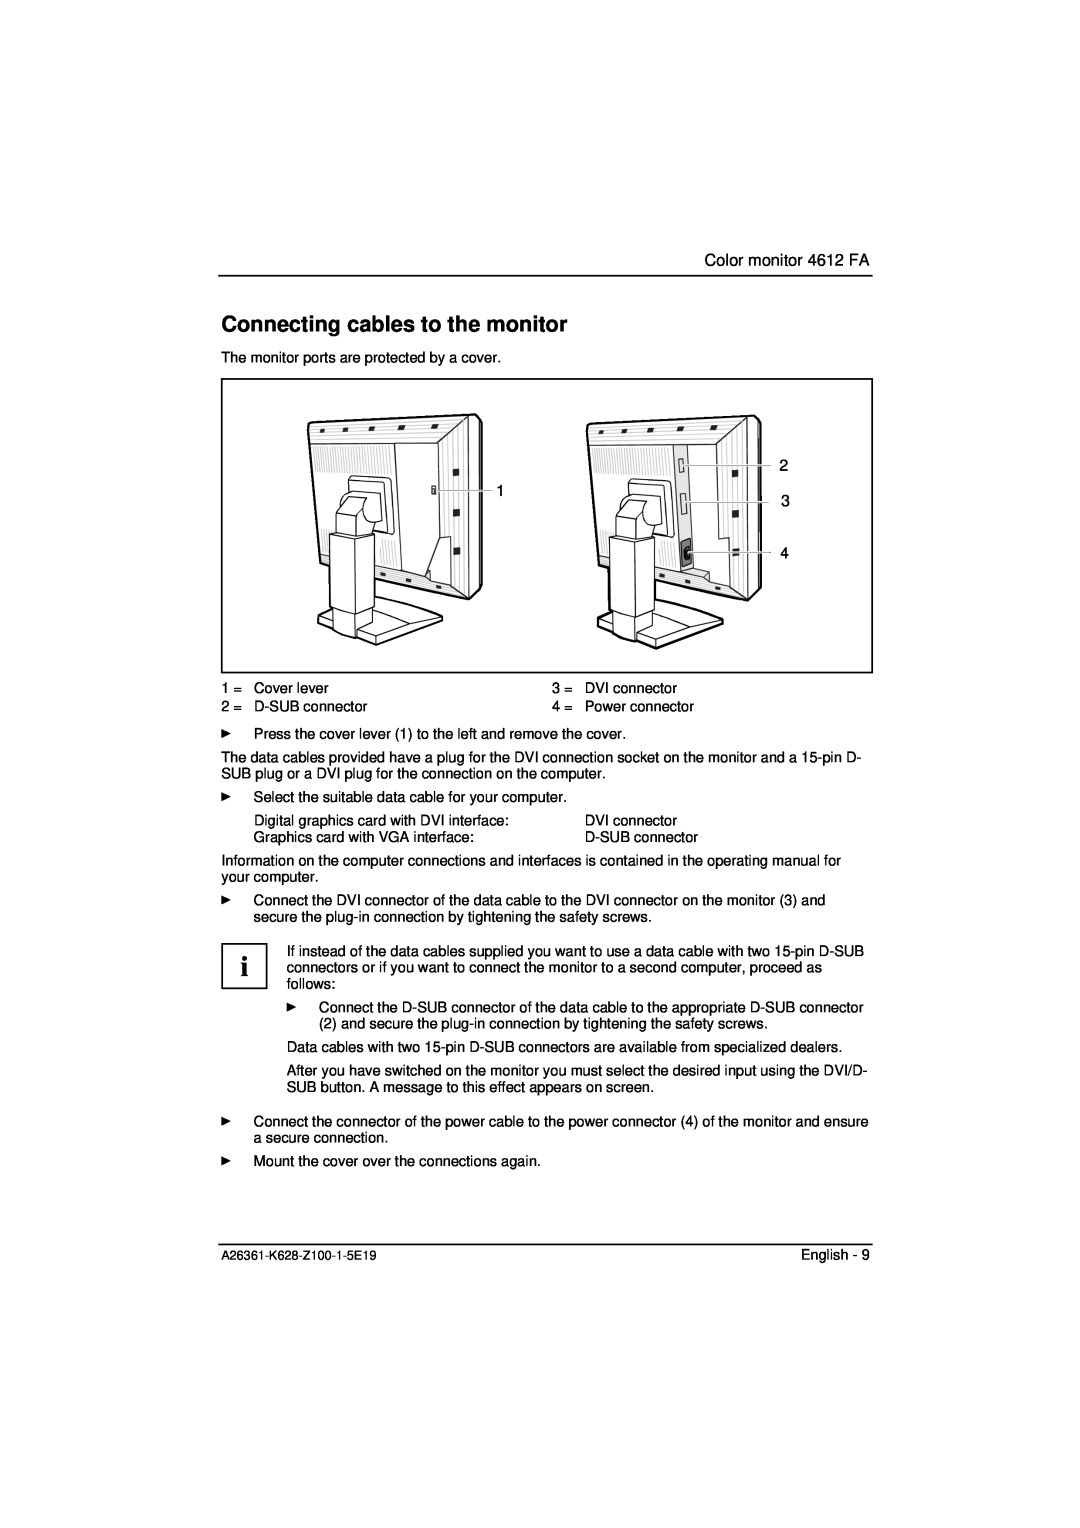 Fujitsu Siemens Computers manual Connecting cables to the monitor, Color monitor 4612 FA, D-SUB connector 